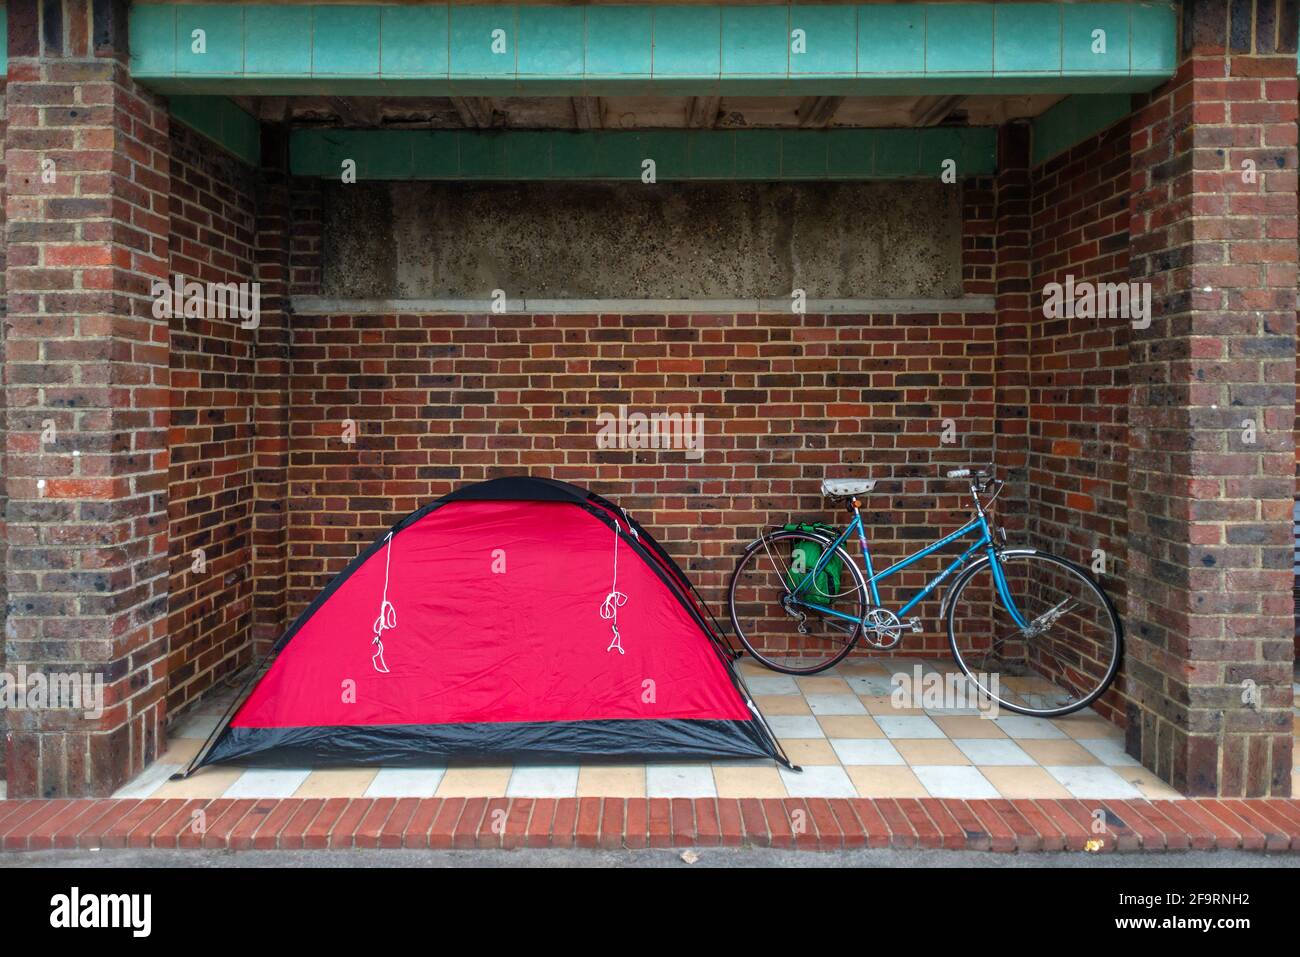 Littlehampton, April 10th 2021: A homeless person's tent and bicycle close to Littlehampton seafront Stock Photo